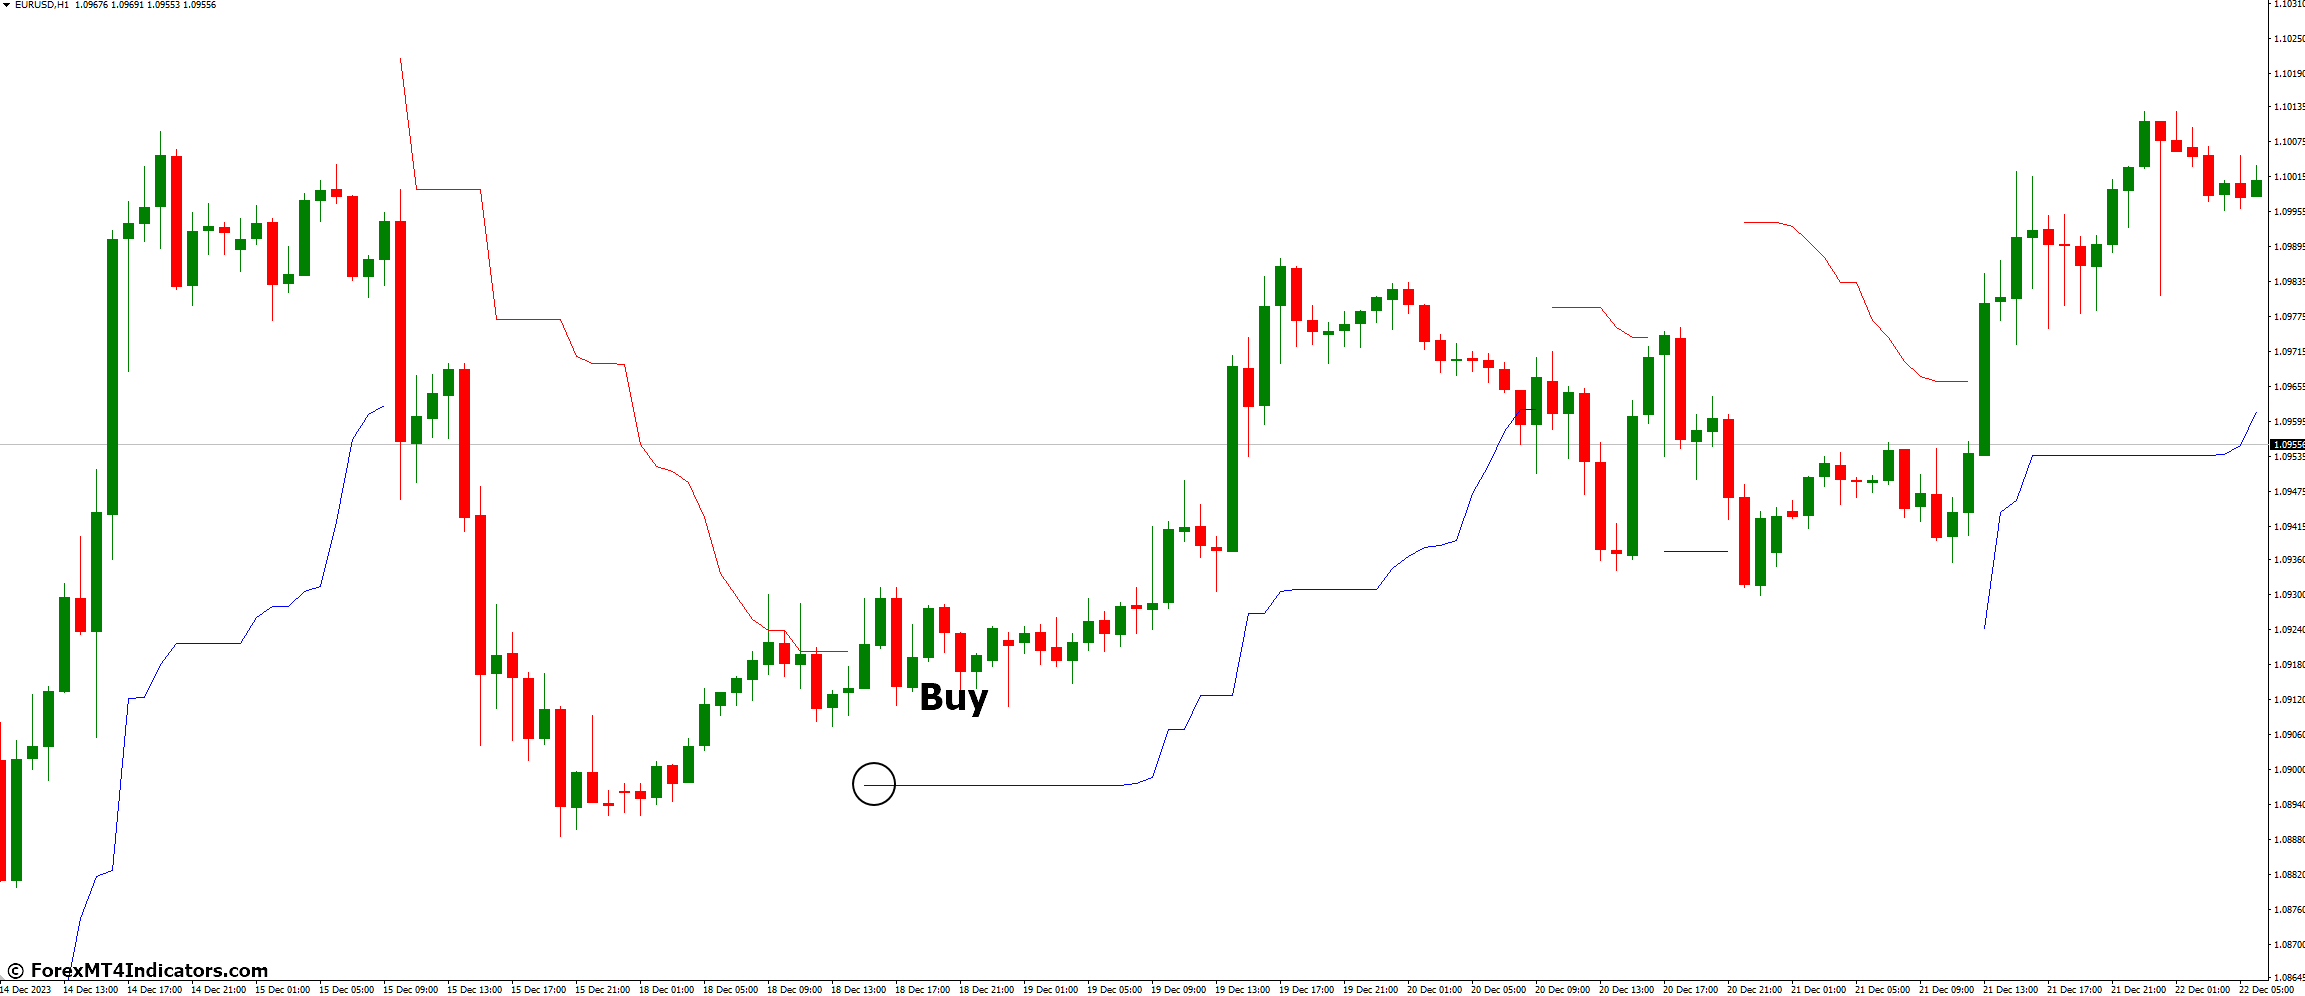 How to Trade with Chandelier Stops V1 Indicator - Buy Entry